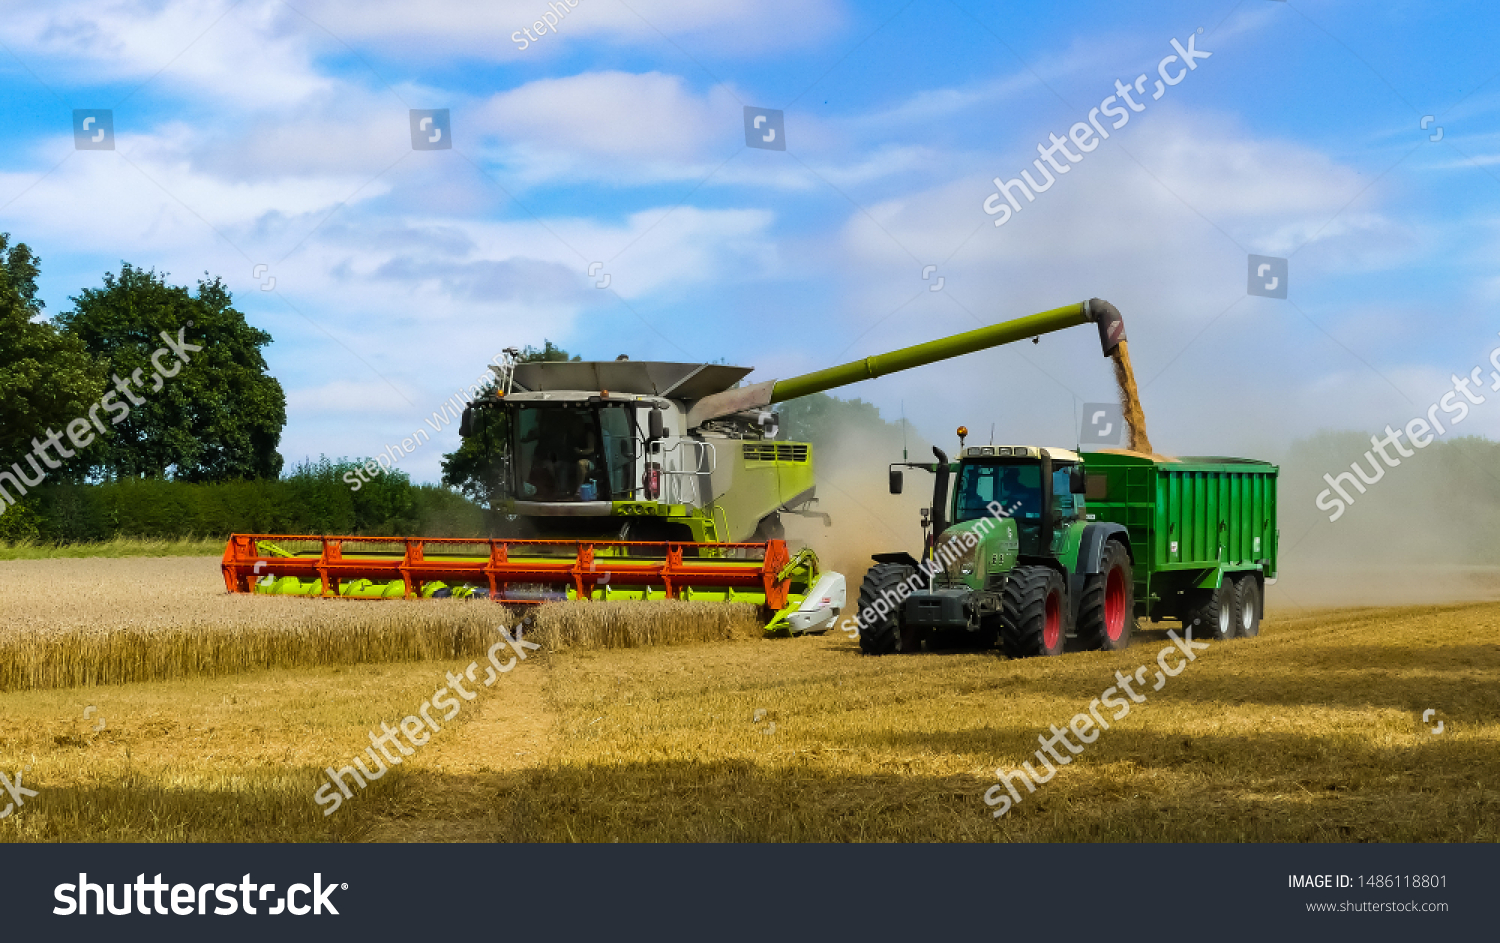 Tractor with trailer working in tandem alongside a working combine harvester discharging grain from uploader in an English cornfield. Dust clouds. Landscape image with space for text. Oxfordshire. #1486118801